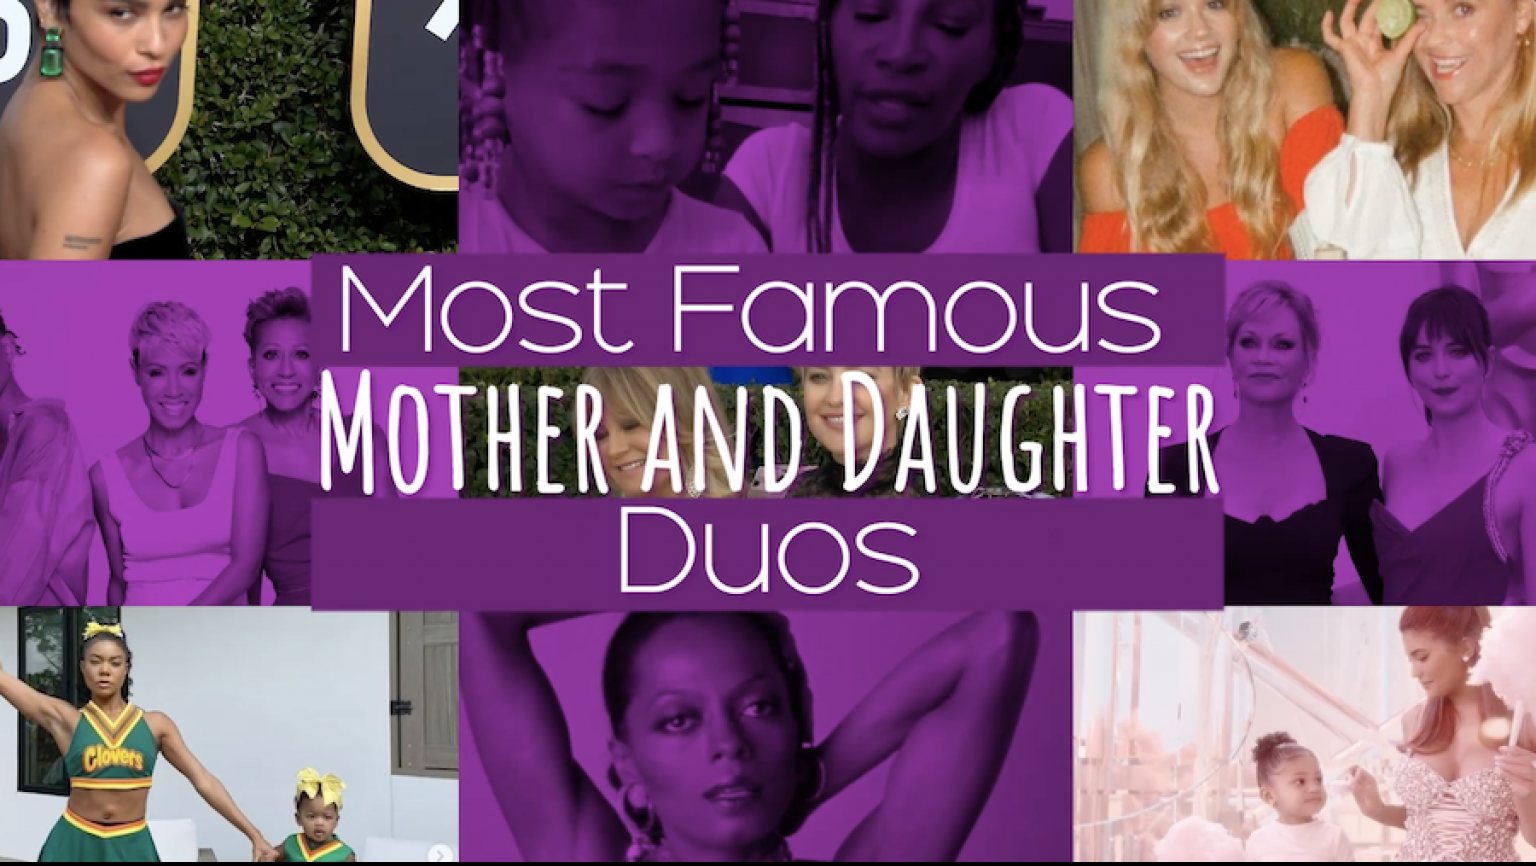 Blue Hair Dye Recommendations for Mother-Daughter Duos - wide 6